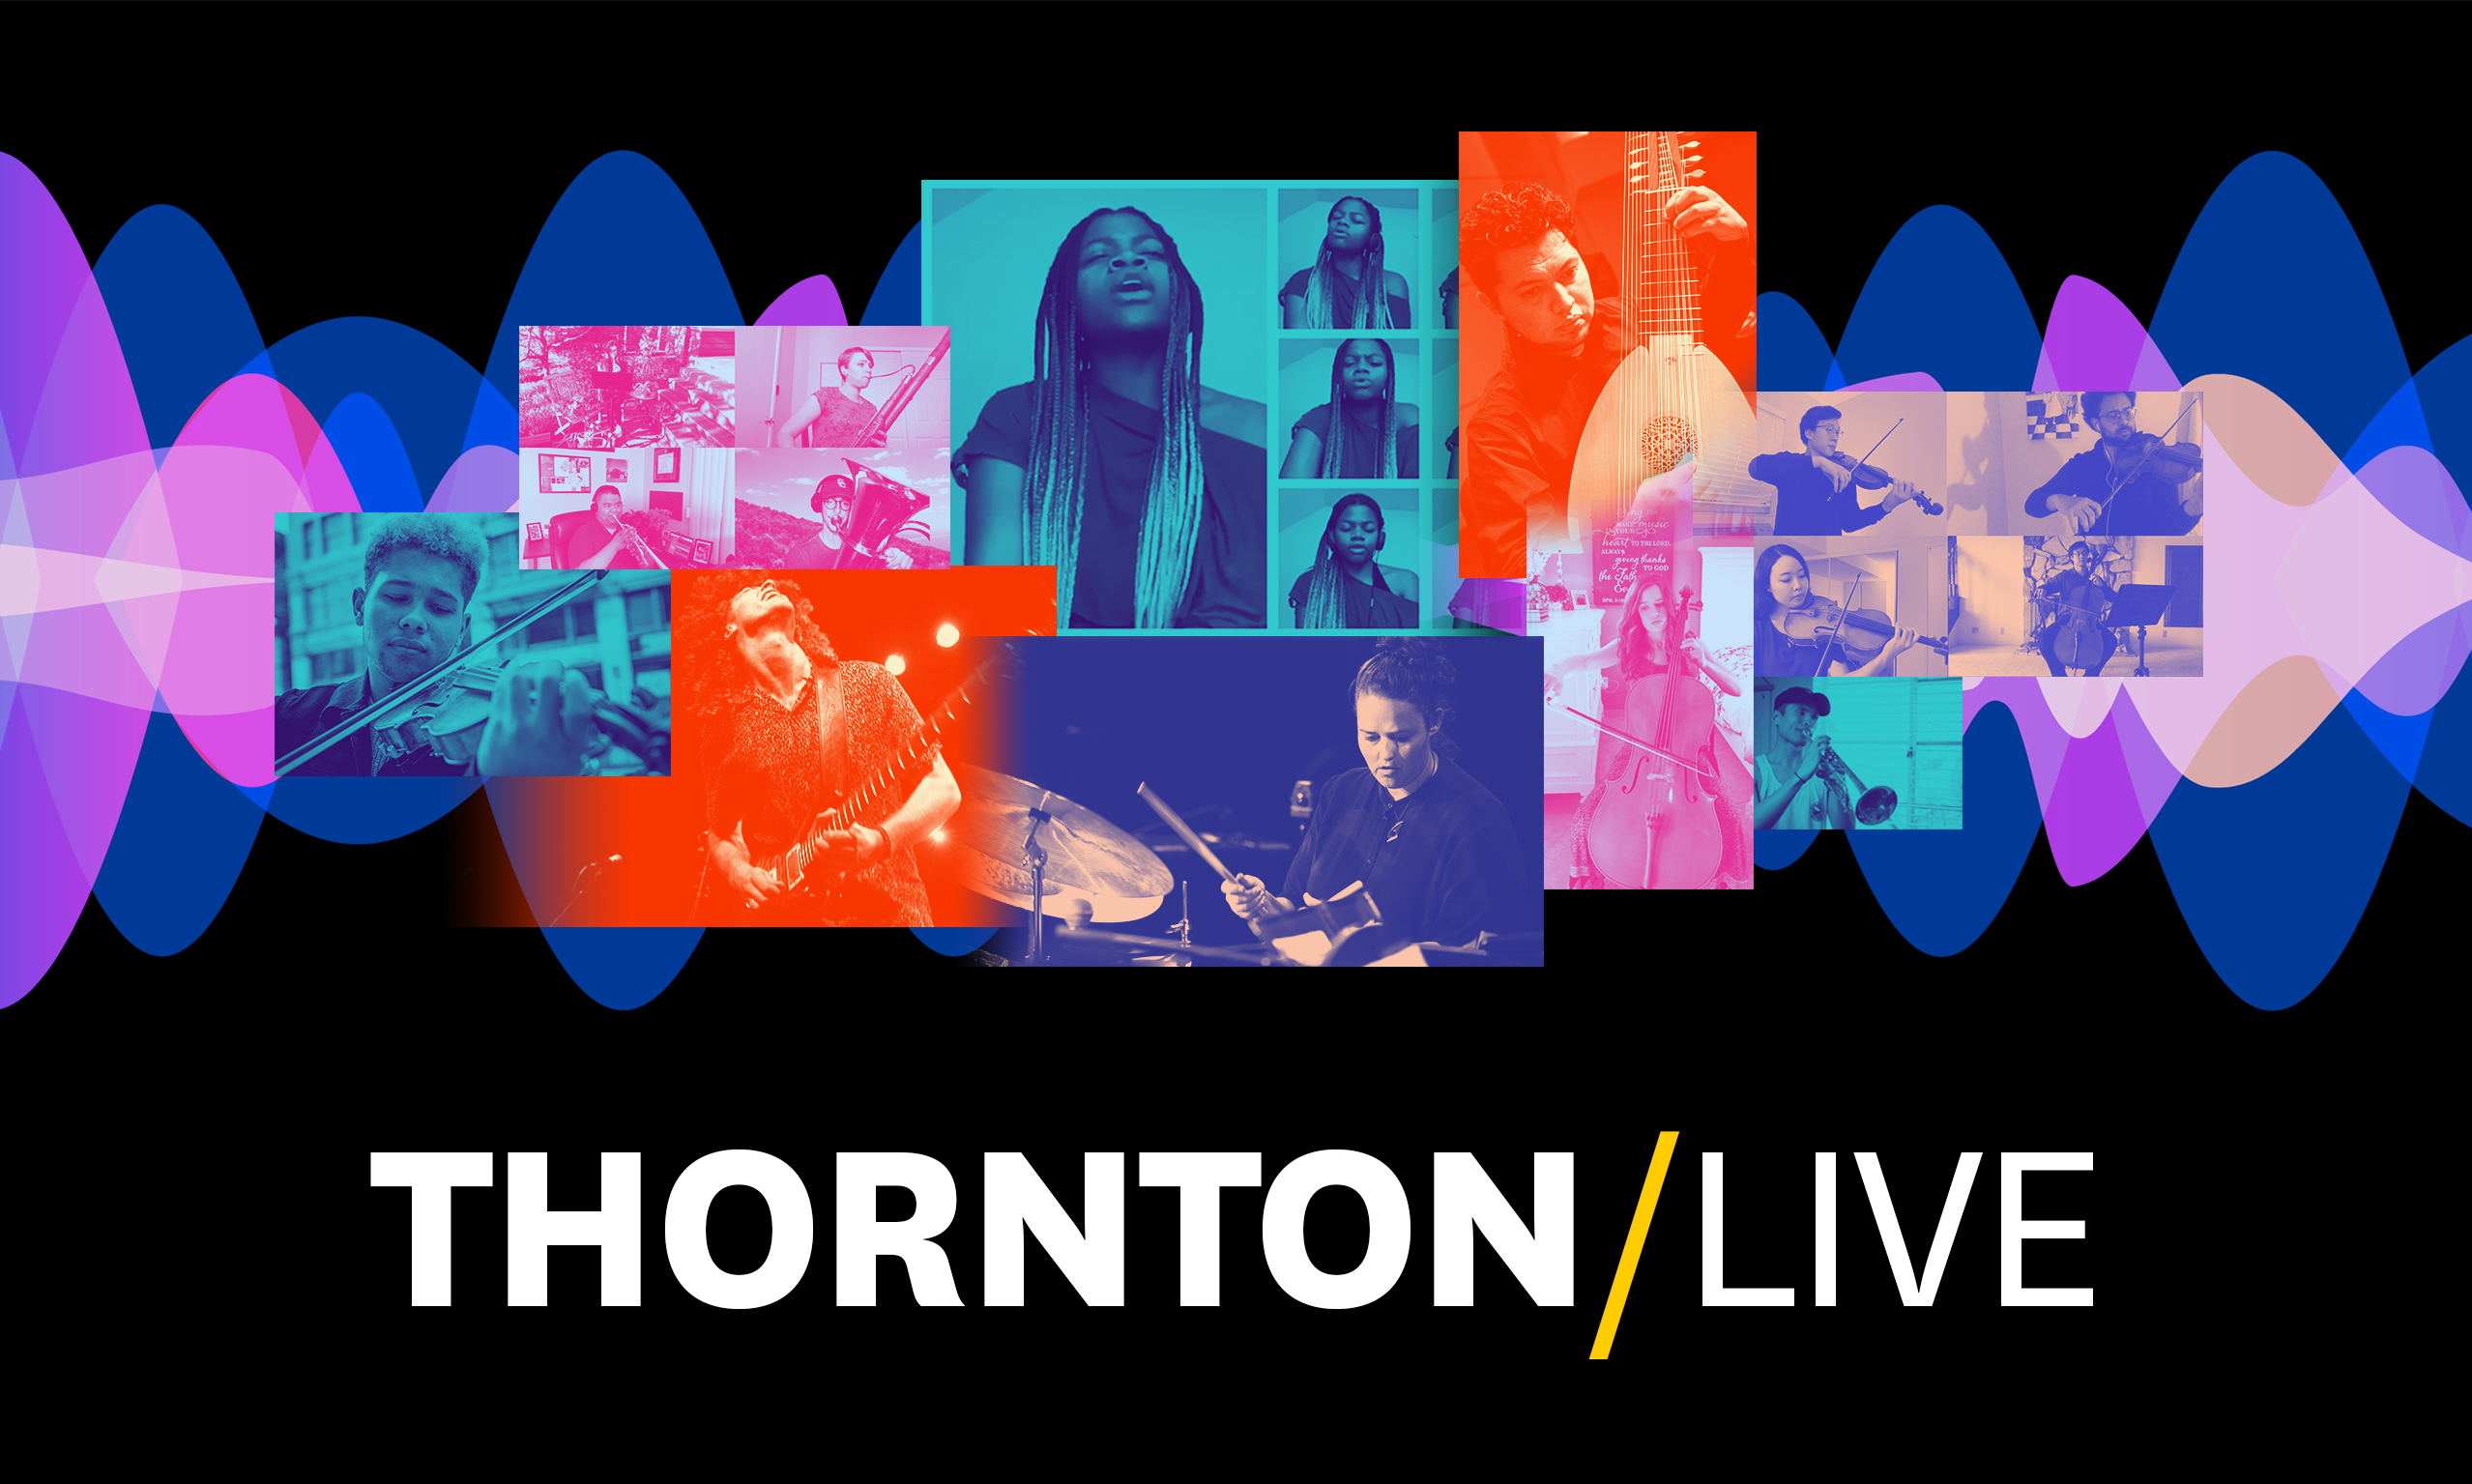 Colorful images of musicians and performers on a black backdrop with text: "Thornton / LIVE"